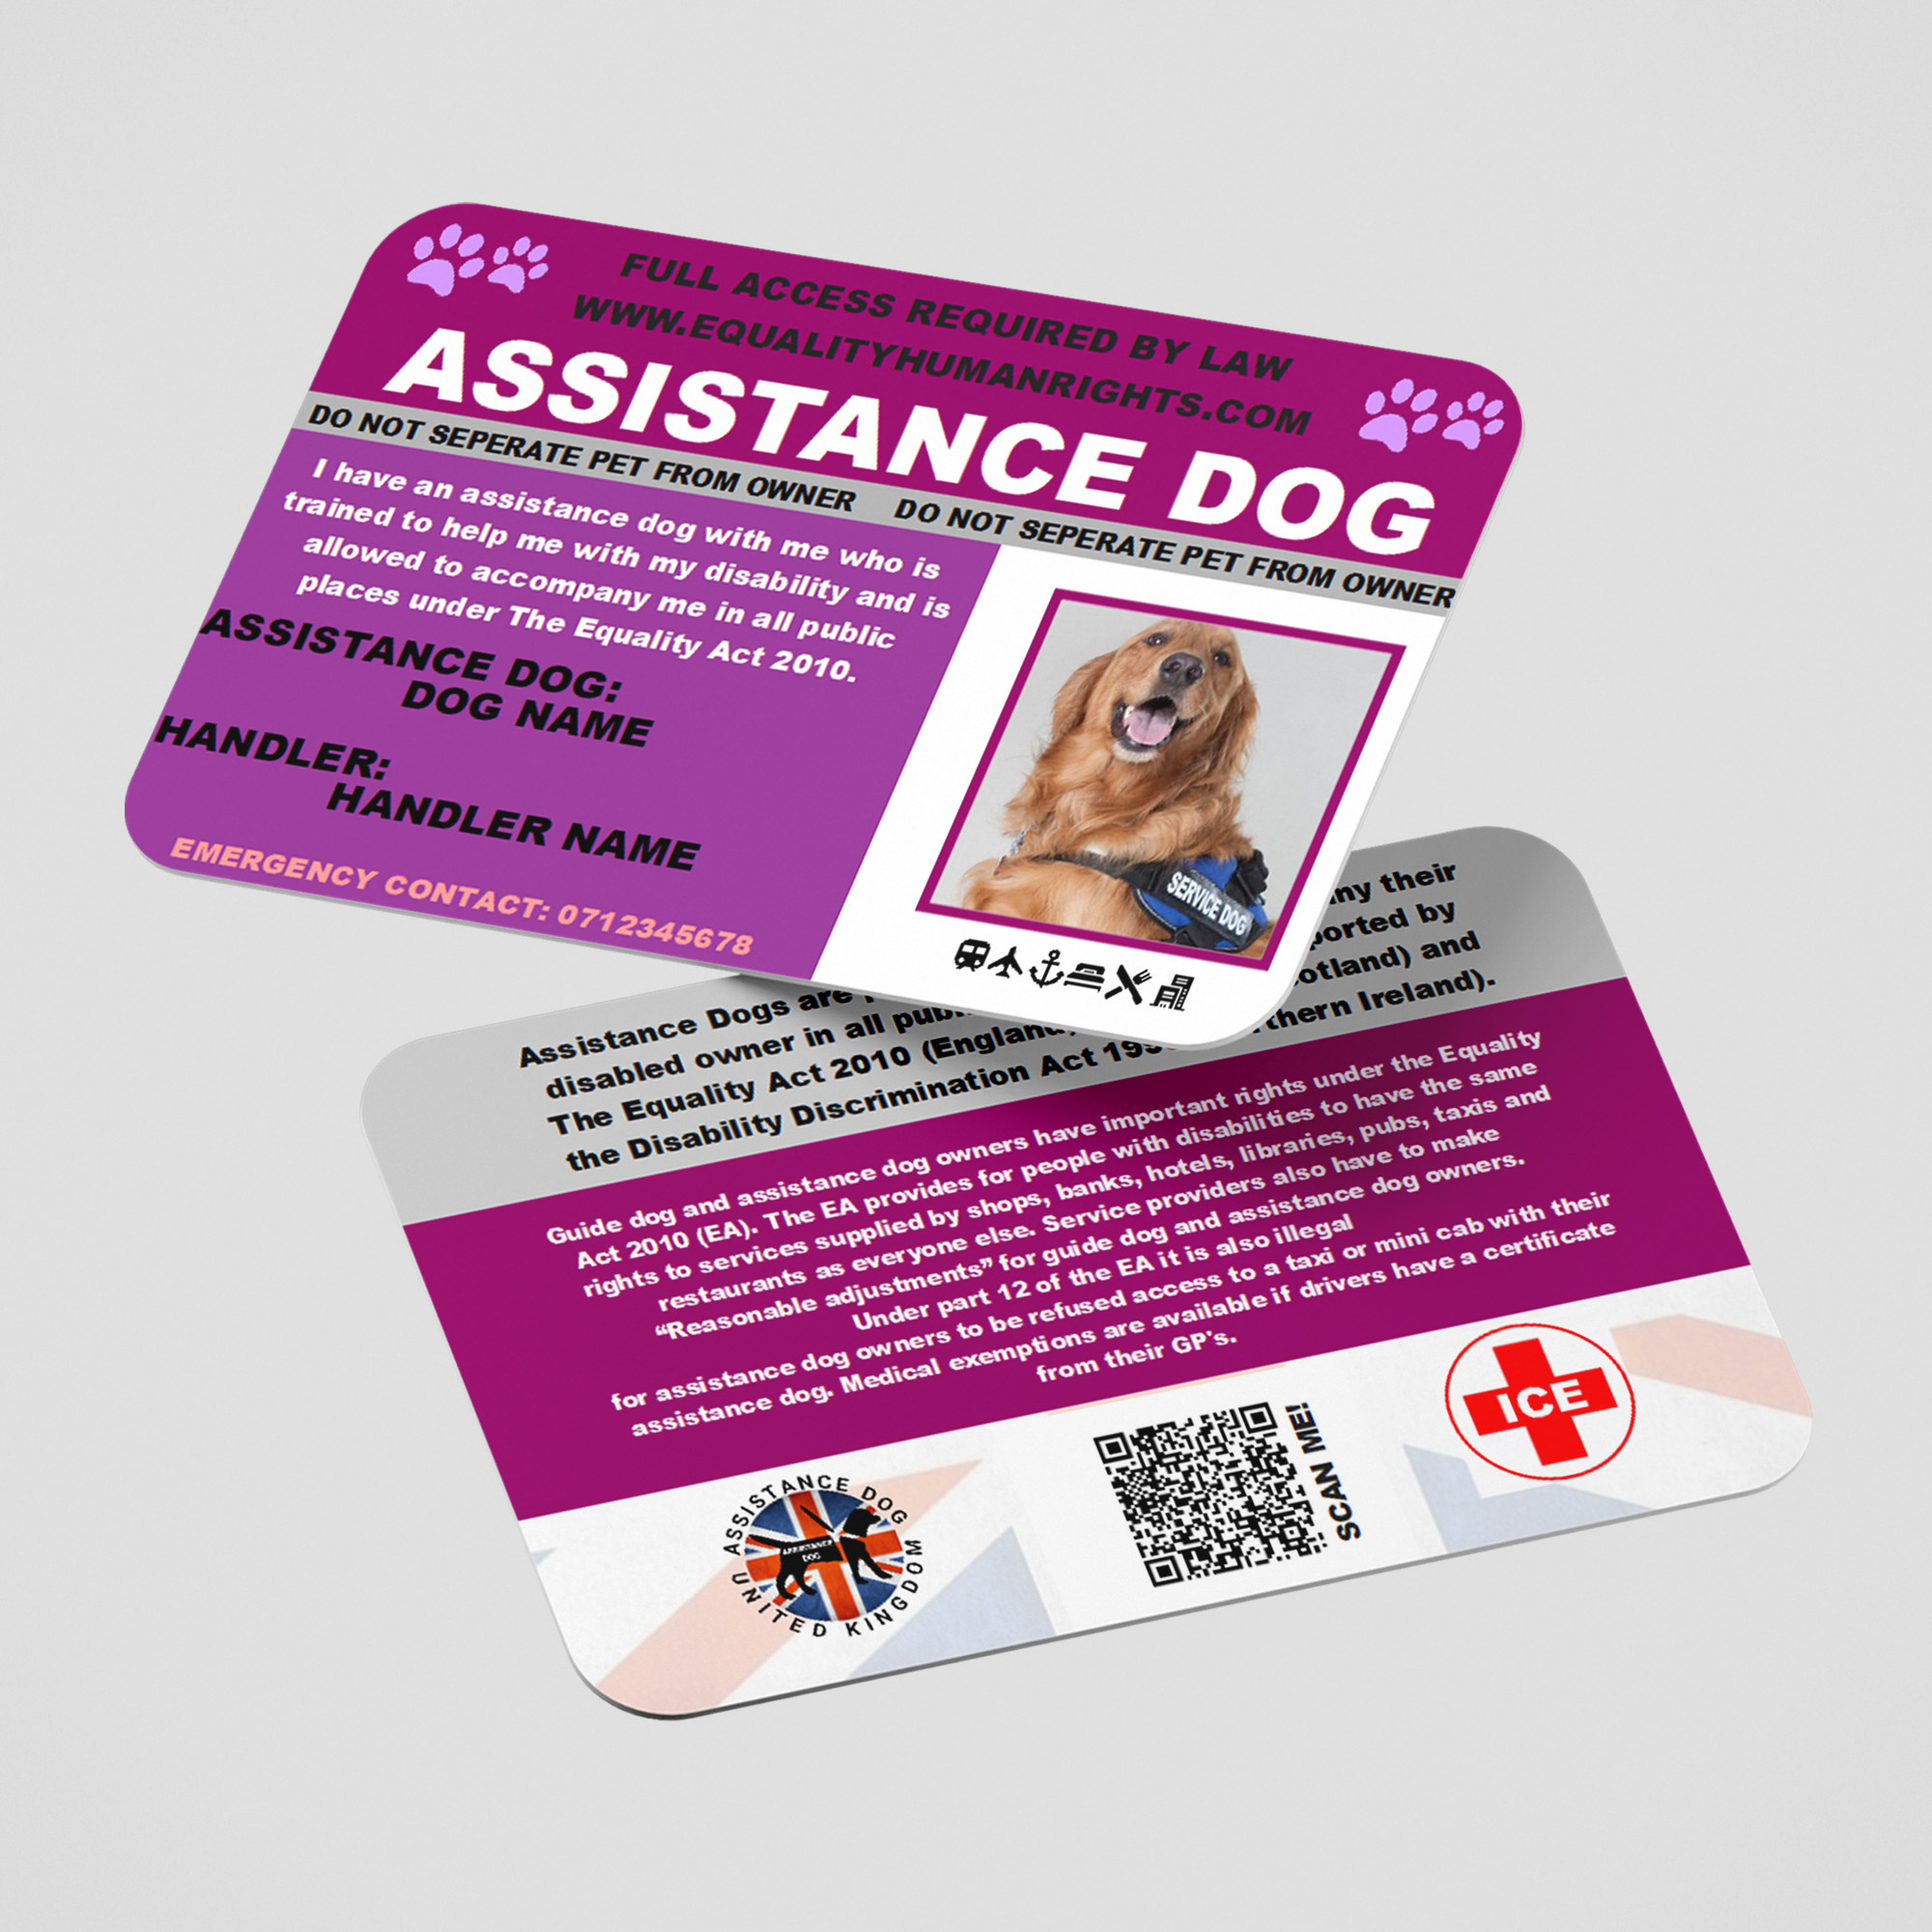 Assistance Dog Law Card AD26 with QR Code